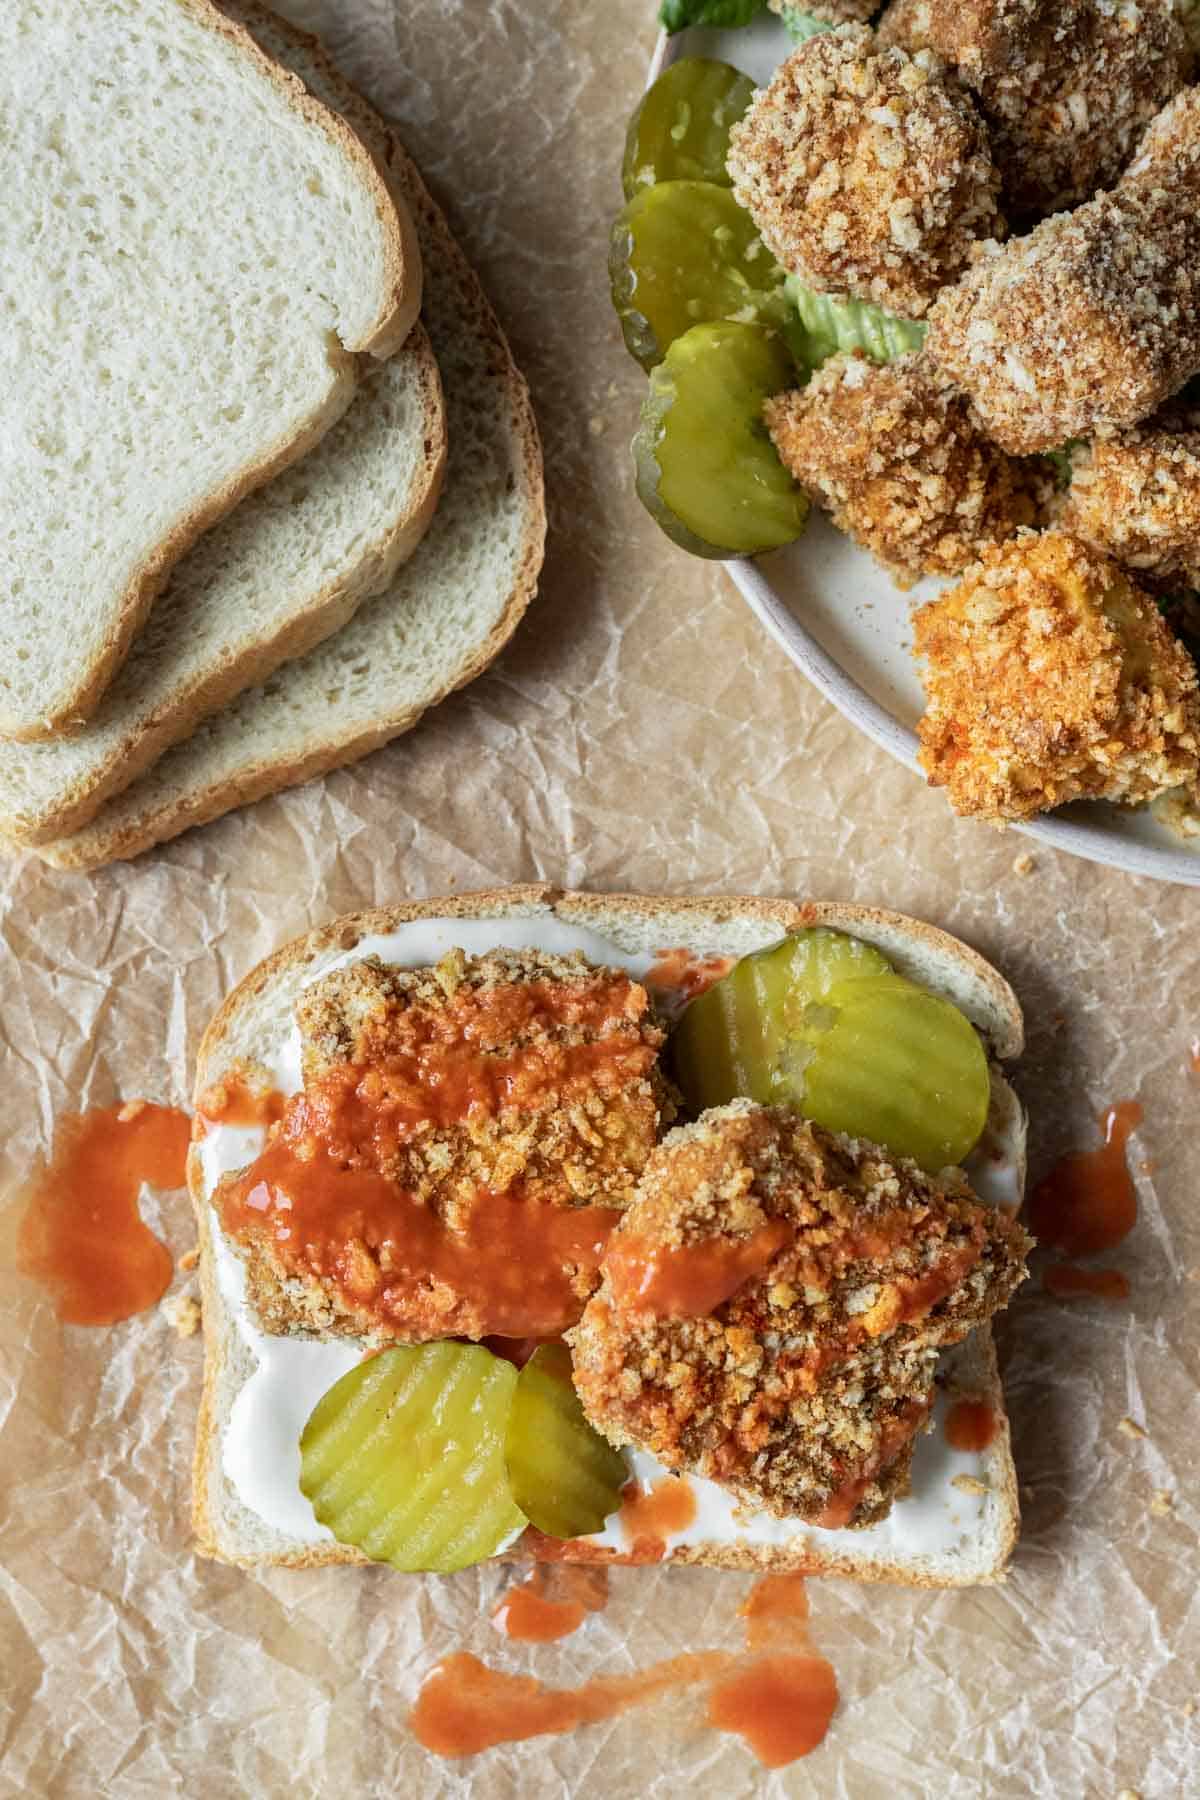 Two pieces of crispy breaded hot tofu on white bread with pickle slices.